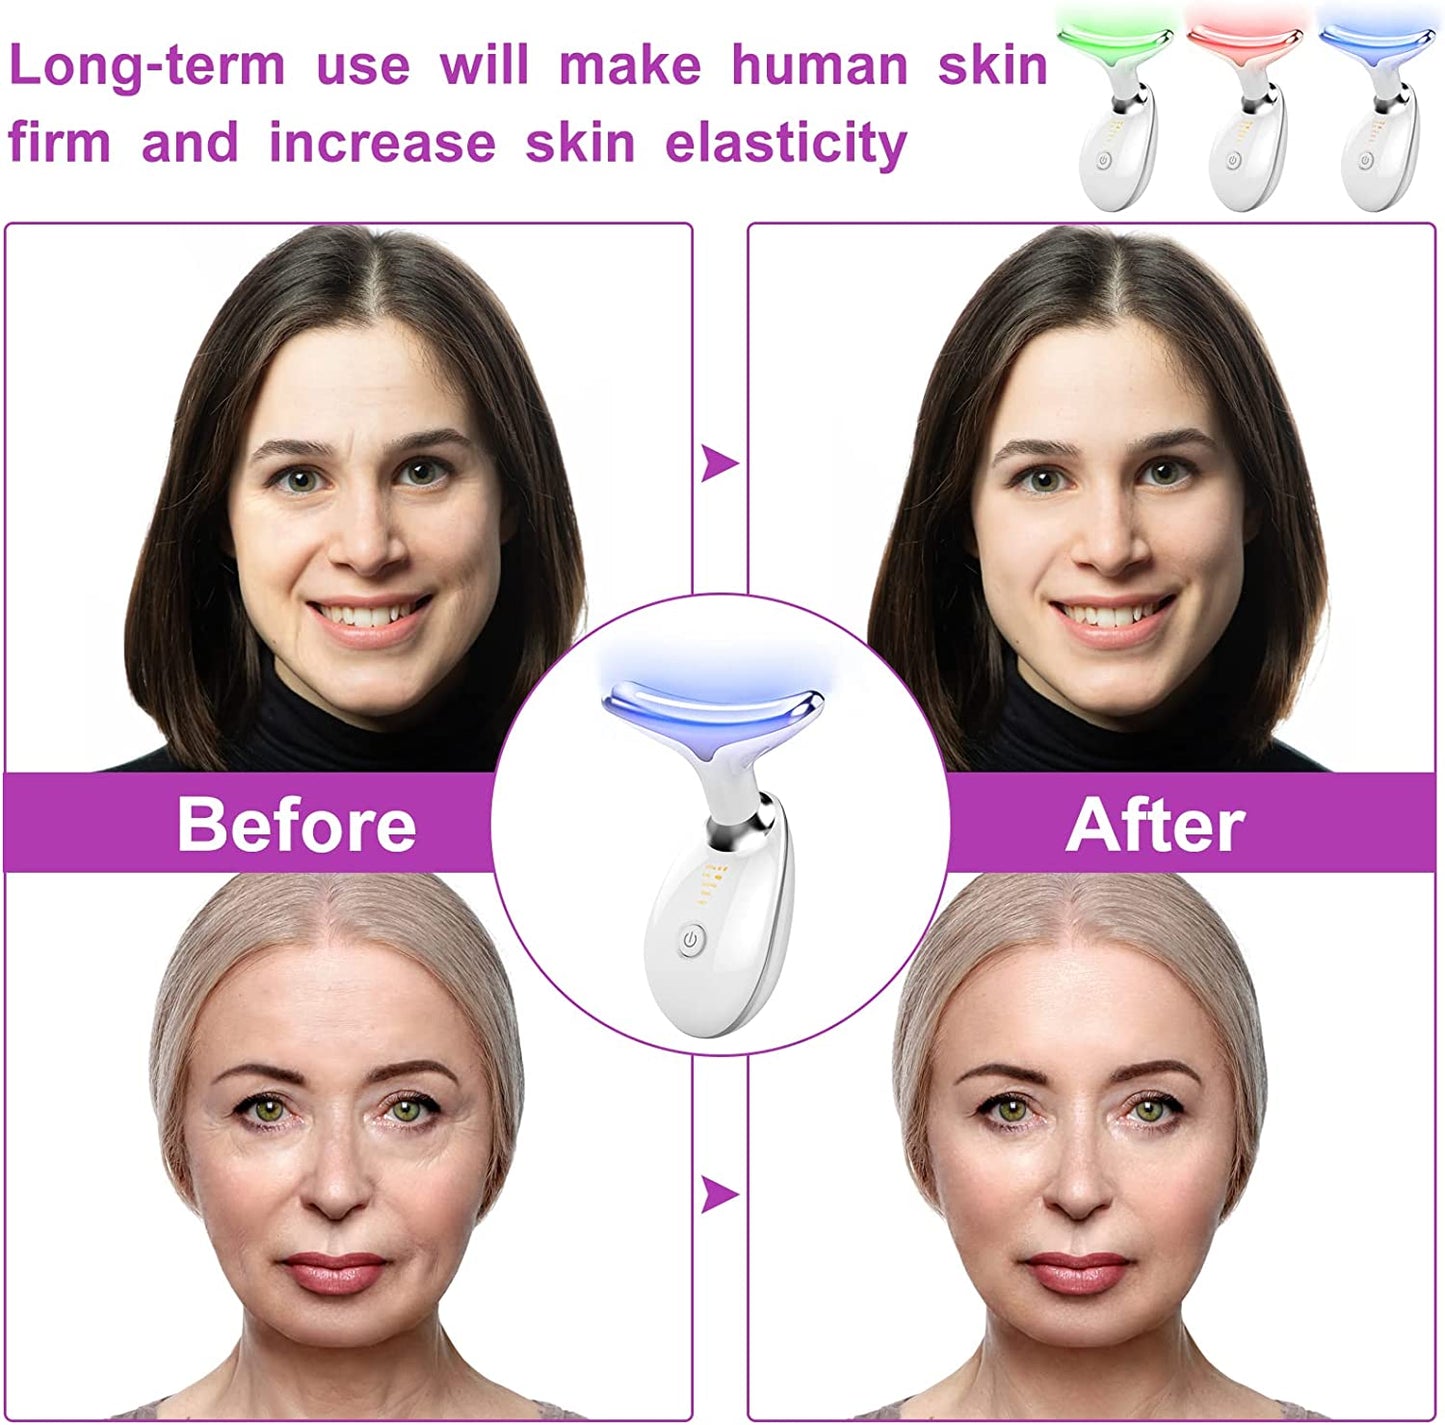 CkeyiN Neck Face Lifting Machine Face Massager Photon Therapy Eye Massage Tool Vibration Anti Wrinkle Double Chin Remover